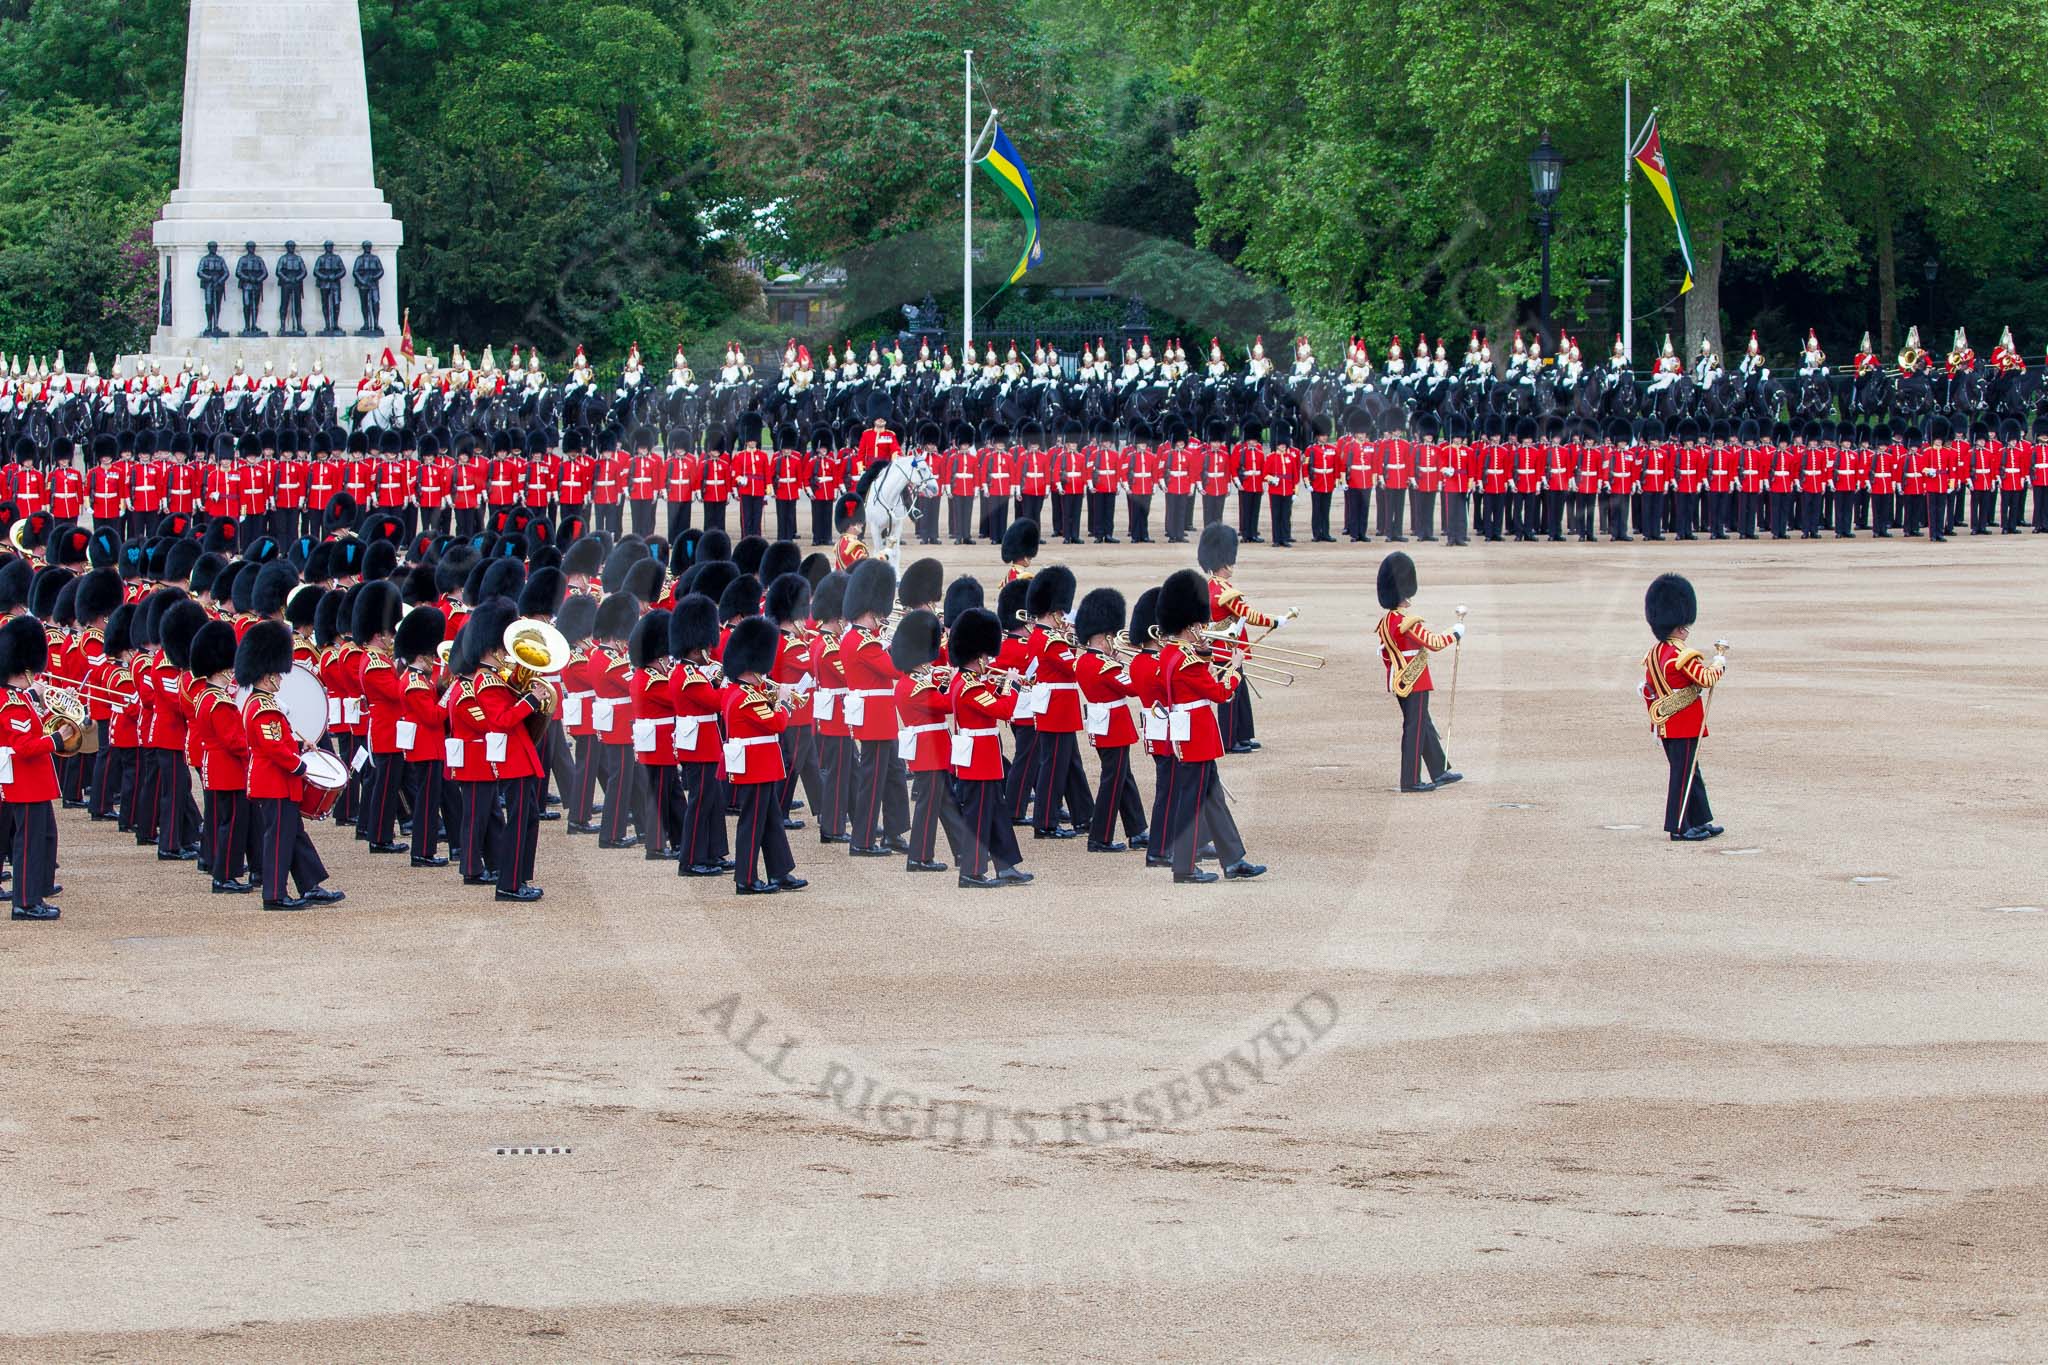 Major General's Review 2013: The Massed Band Troop begins with the slow march - the Waltz from Les Huguenots. The Field Officer, and behind him the Third and Fourth Division of the Sovereign's Escort, The Blues and Royals, can be seen on top of the image..
Horse Guards Parade, Westminster,
London SW1,

United Kingdom,
on 01 June 2013 at 11:08, image #318